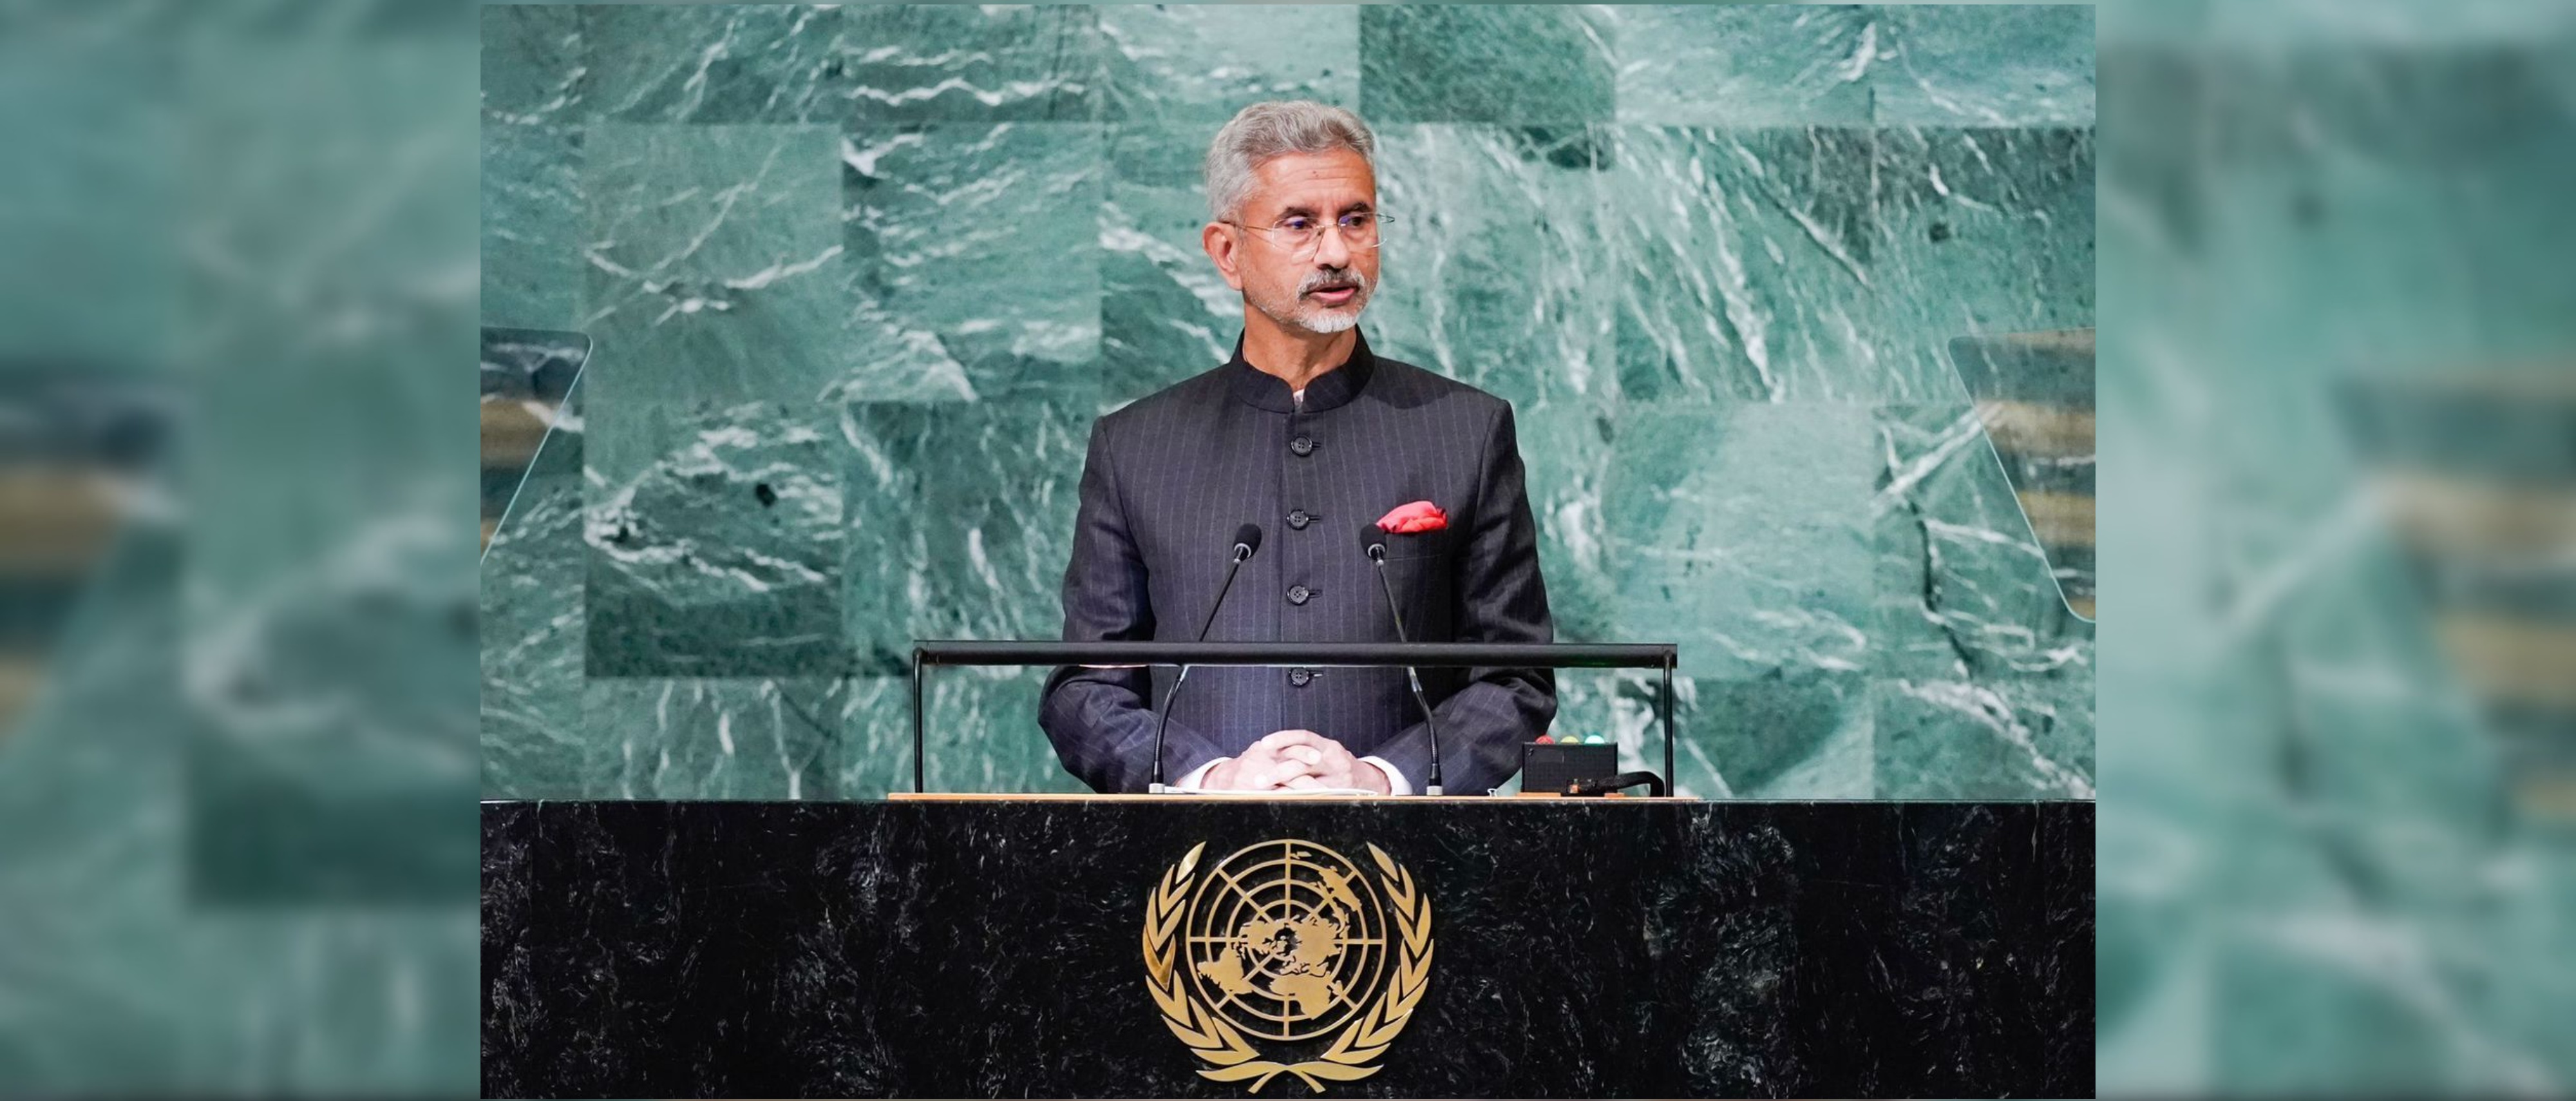  India’s Statement delivered by the External Affairs Minister, Dr. S. Jaishankar at the General Debate of the 77th session of the UN General Assembly